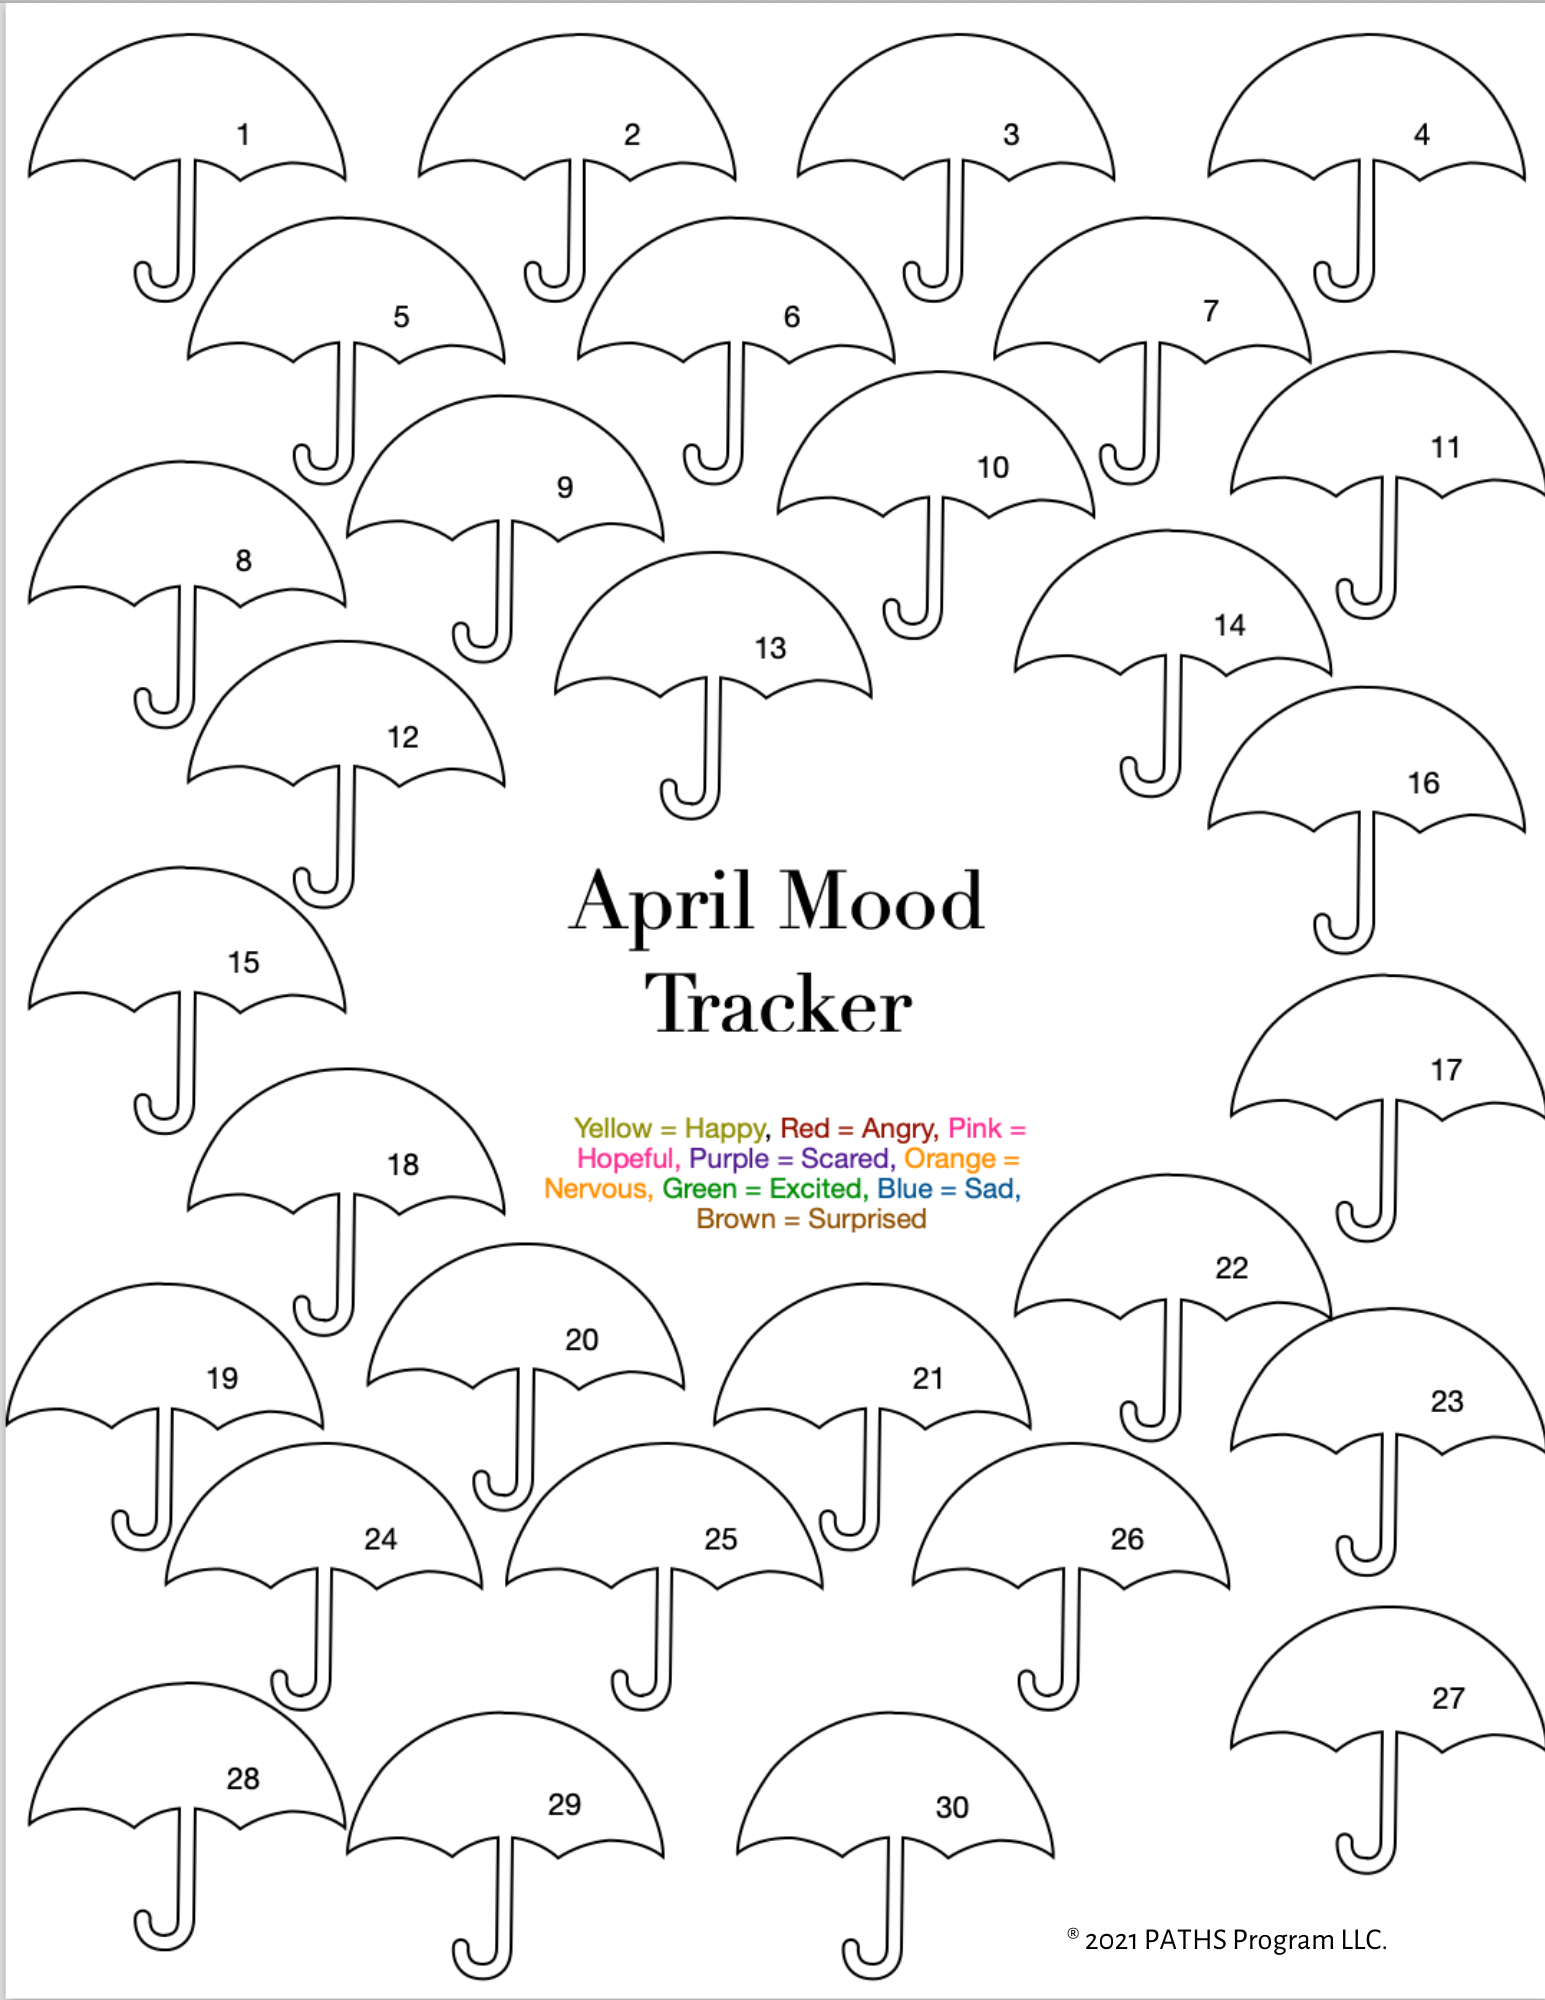 Monthly Mood Trackers (1)